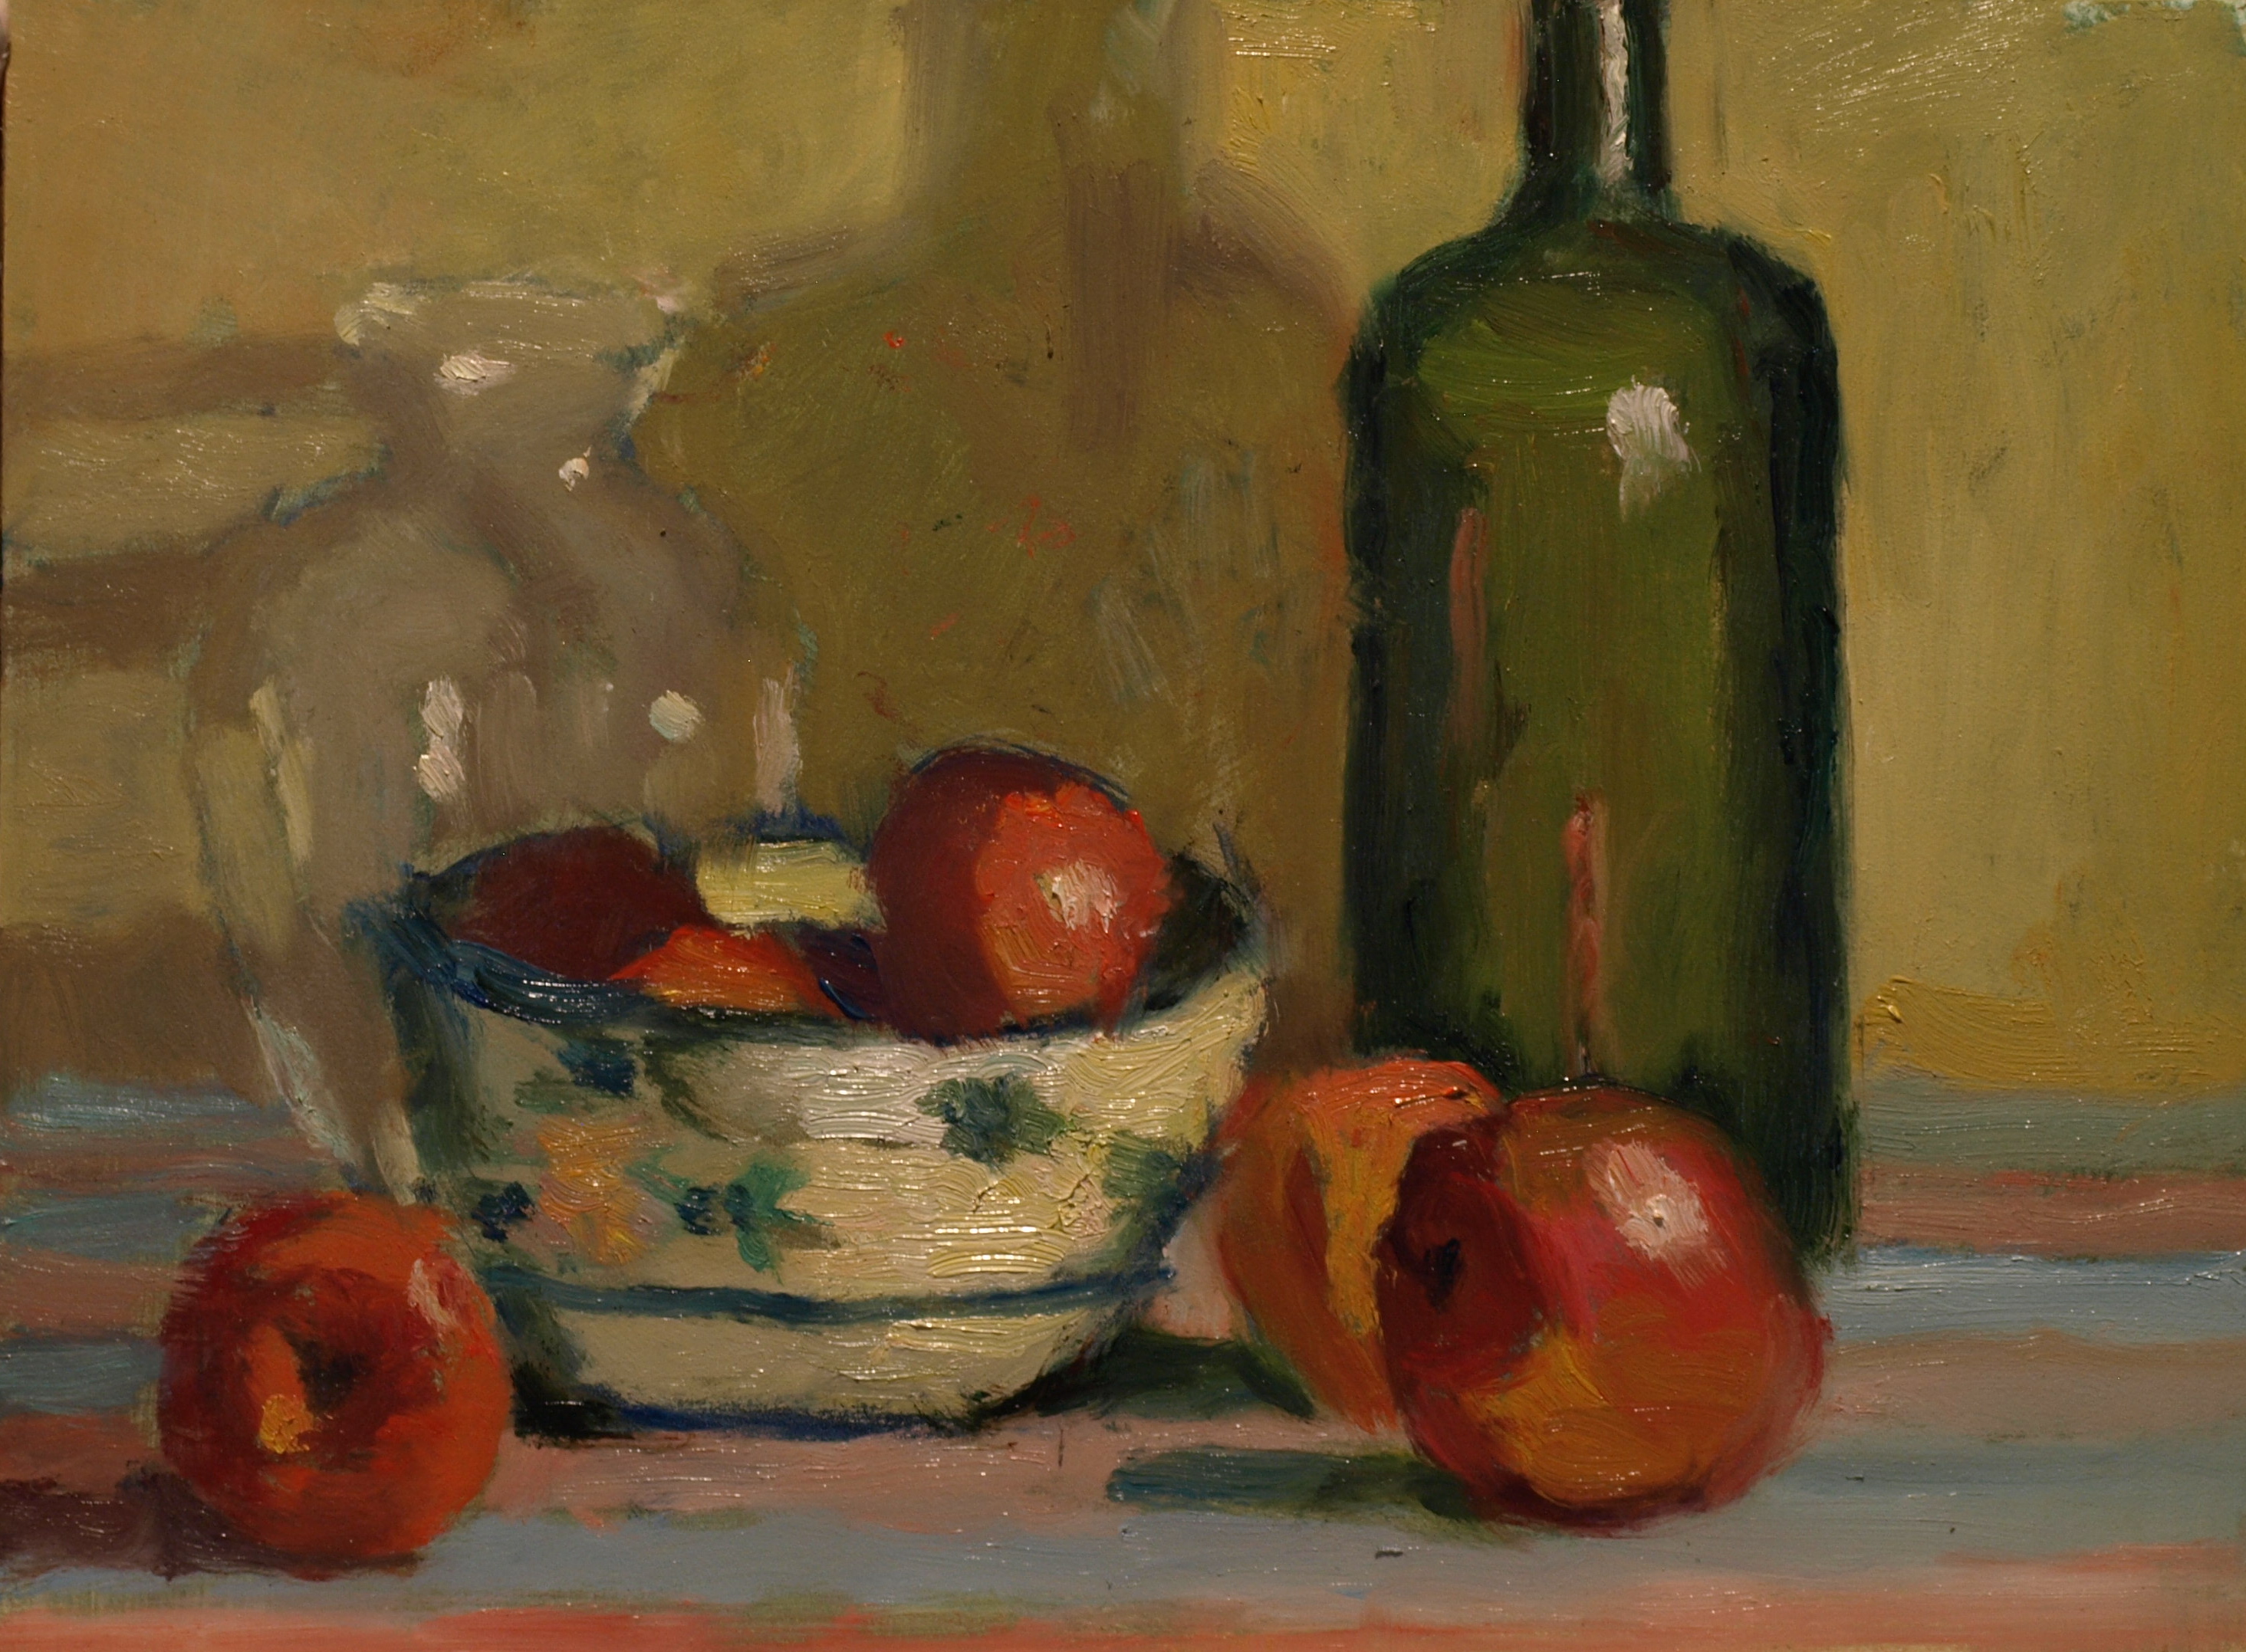 Green Bottle with Apples, Oil on Panel, 9 x 12 Inches, by Richard Stalter, $220